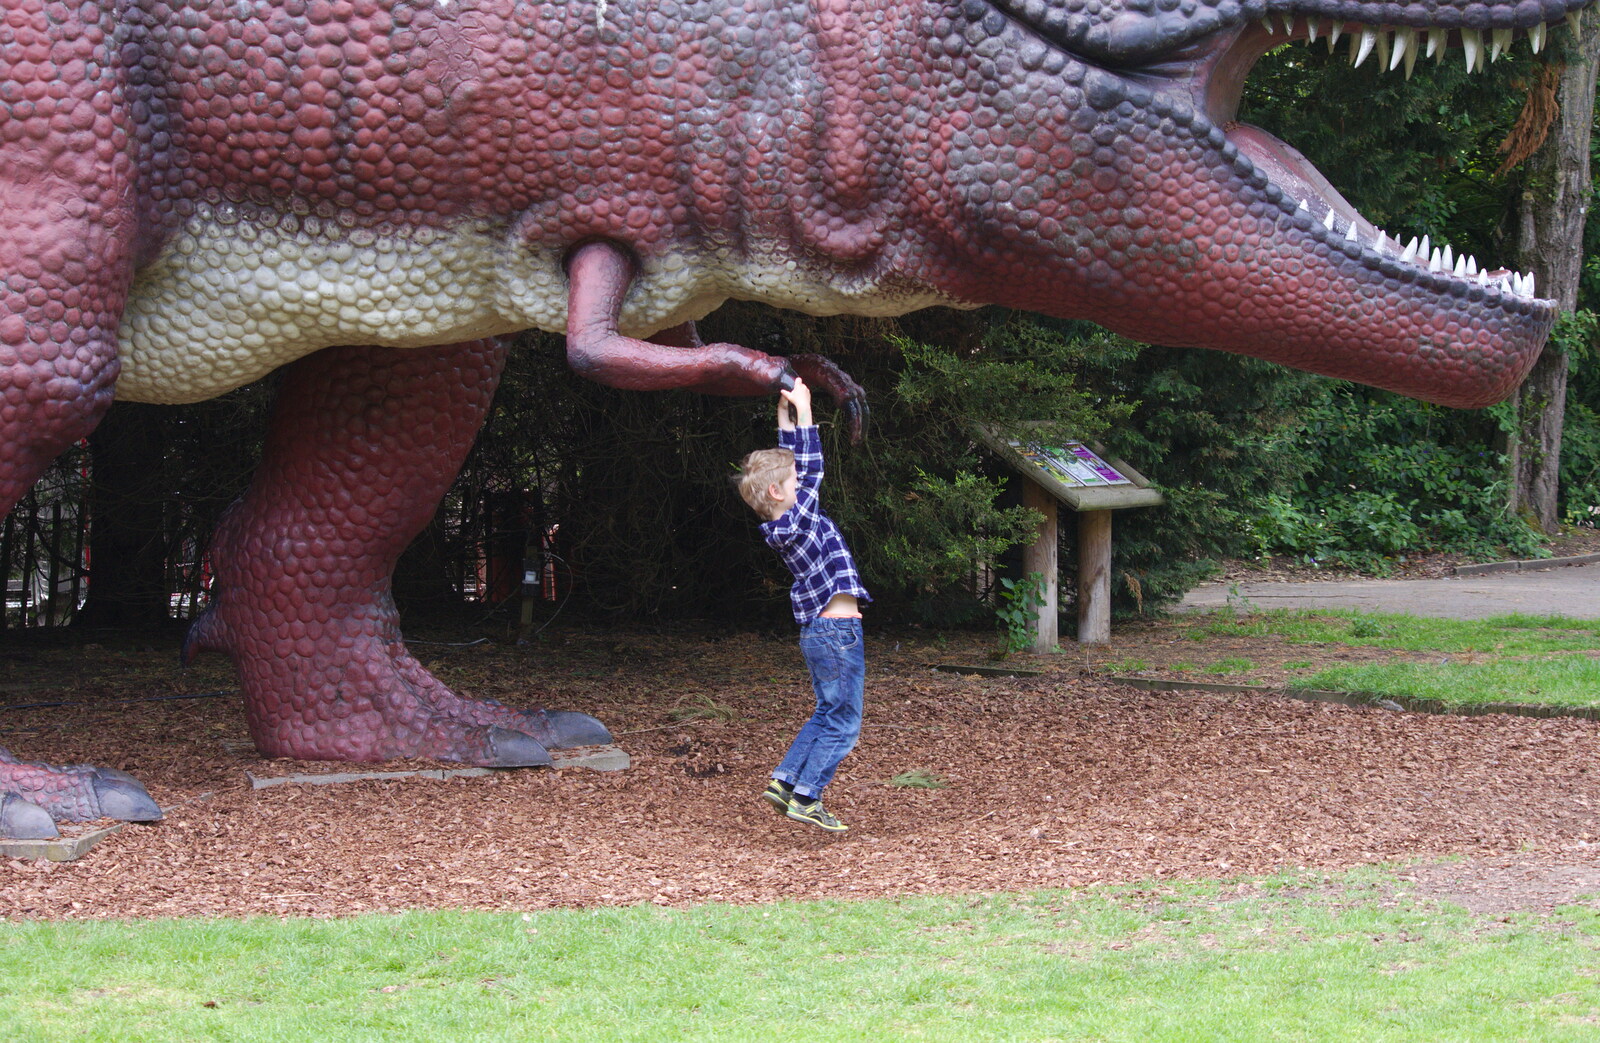 Fred hangs off a Tyrannosaurus Rex from A Birthday Trip to the Zoo, Banham, Norfolk - 26th May 2014